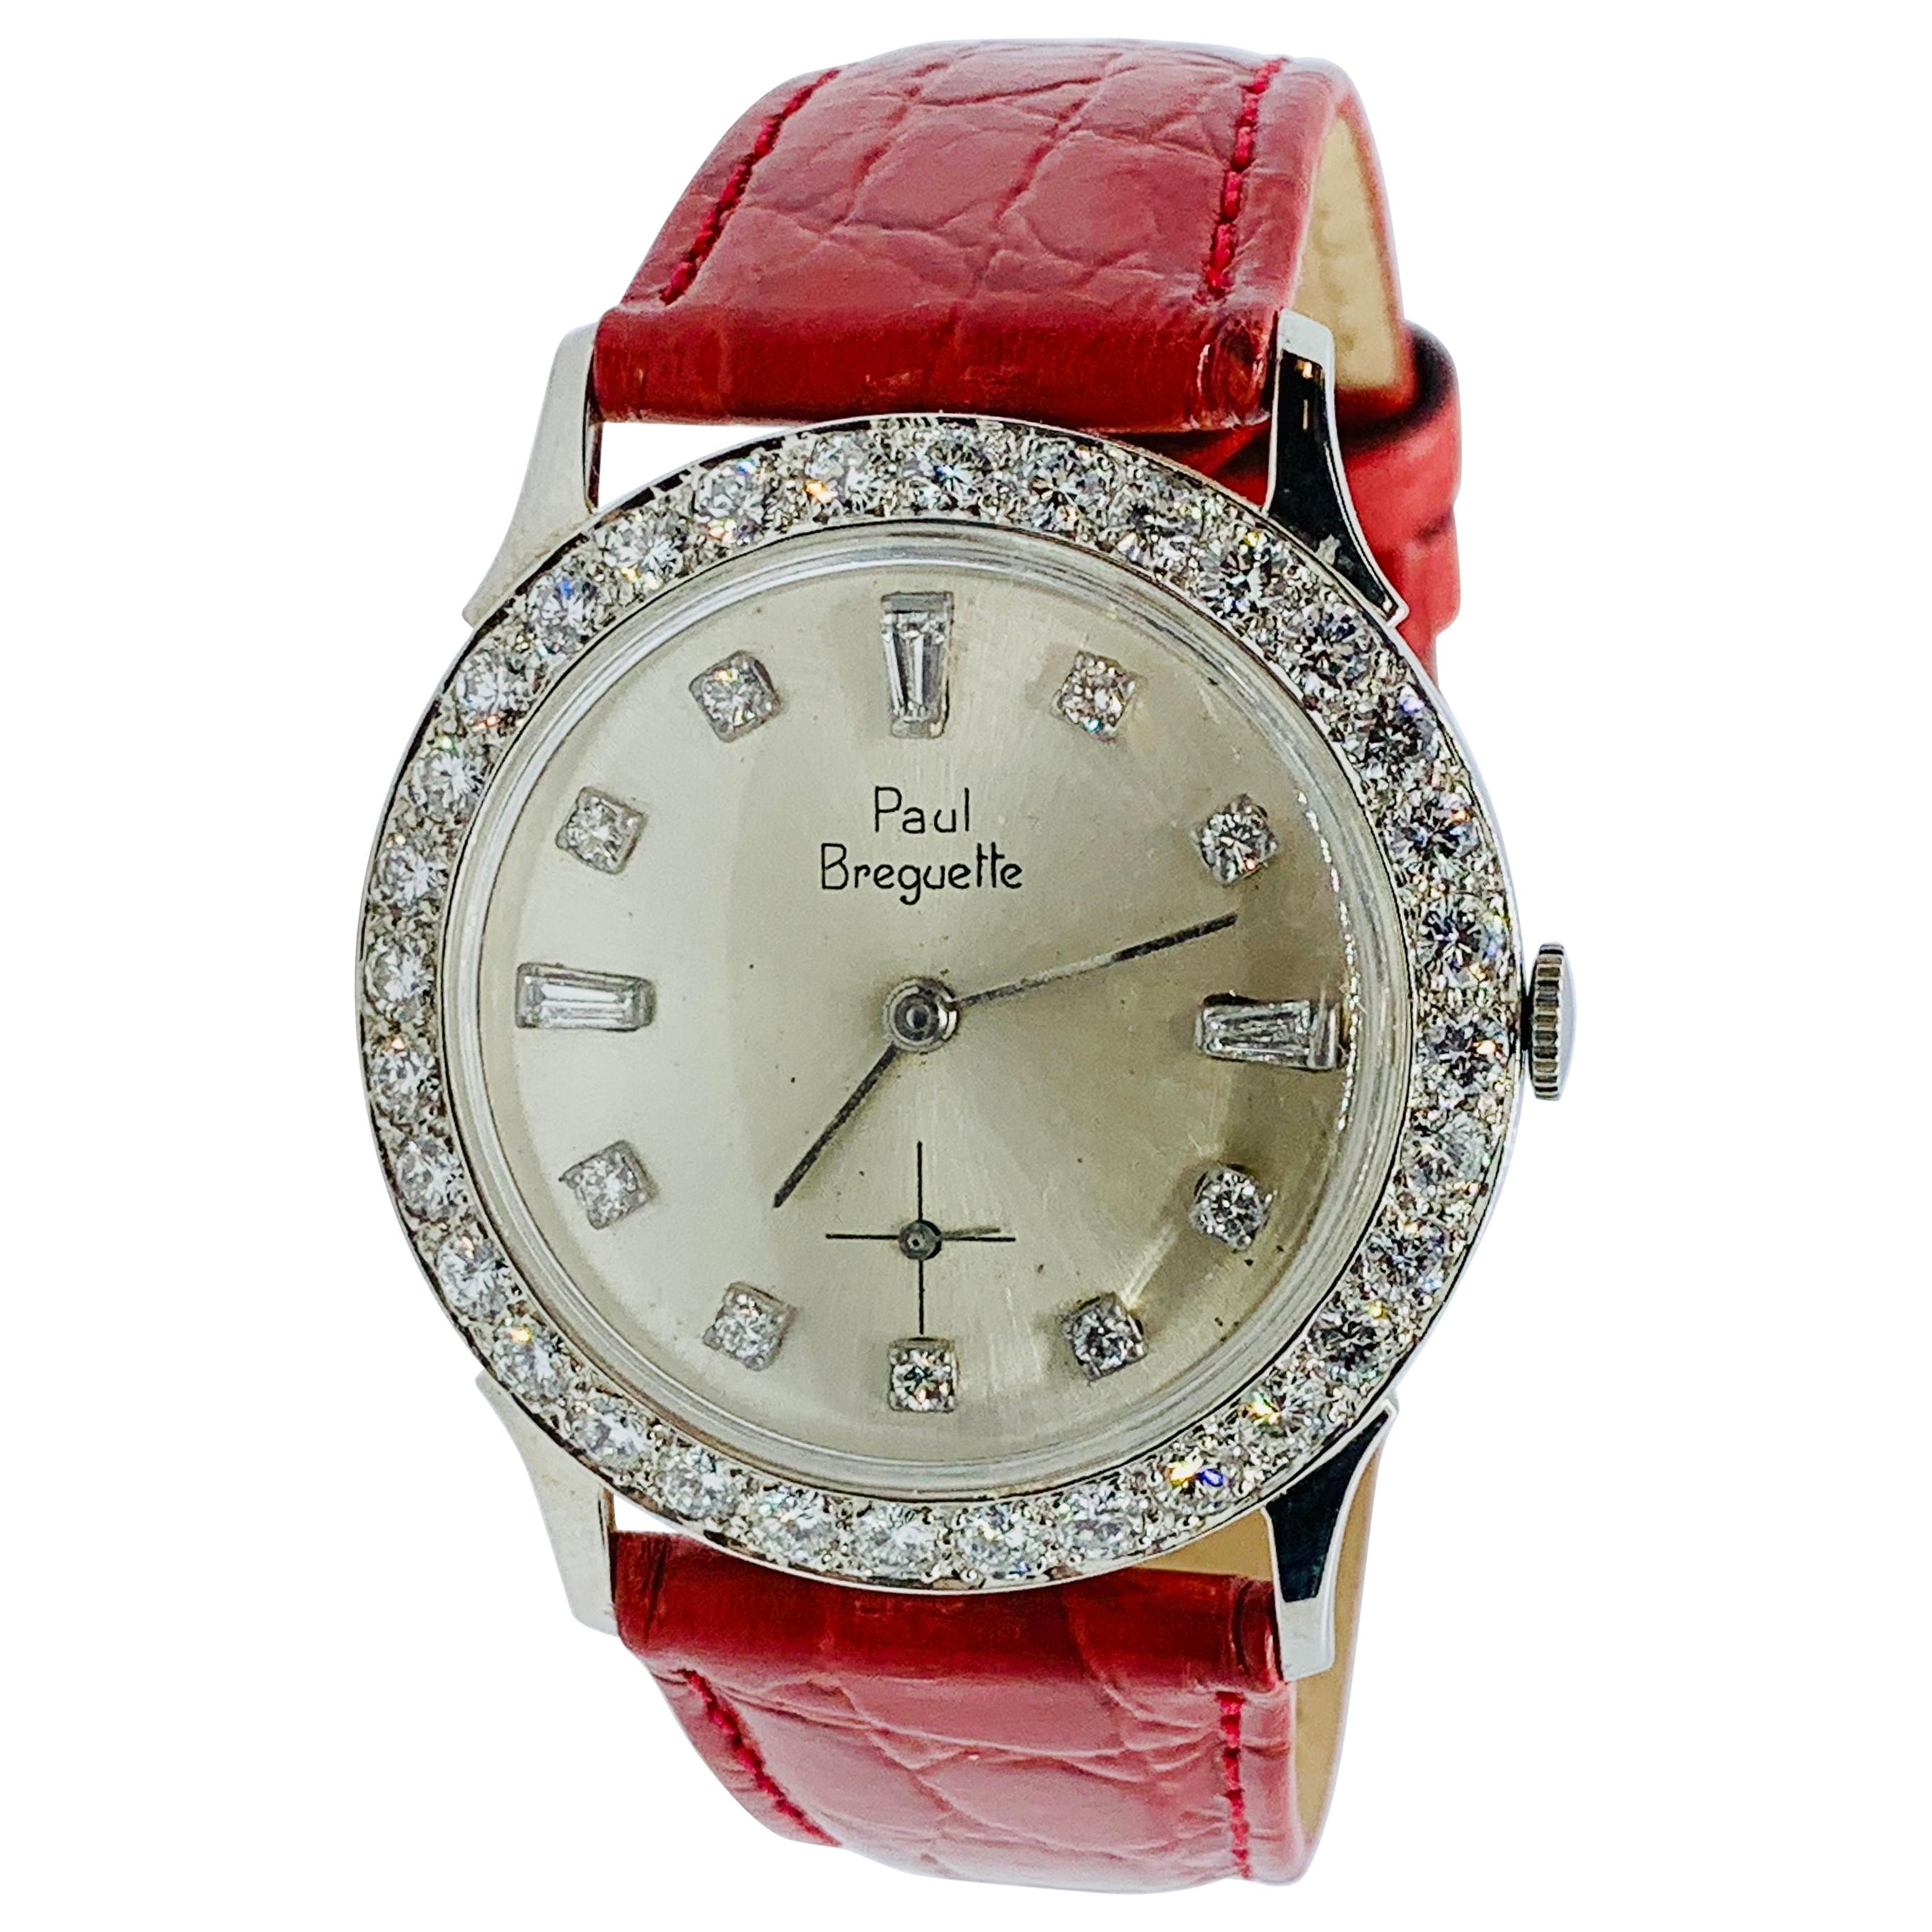 Paul Breguette Estate 14 Karat Gold and Diamond Tuxedo Watch with Leather  Band at 1stDibs